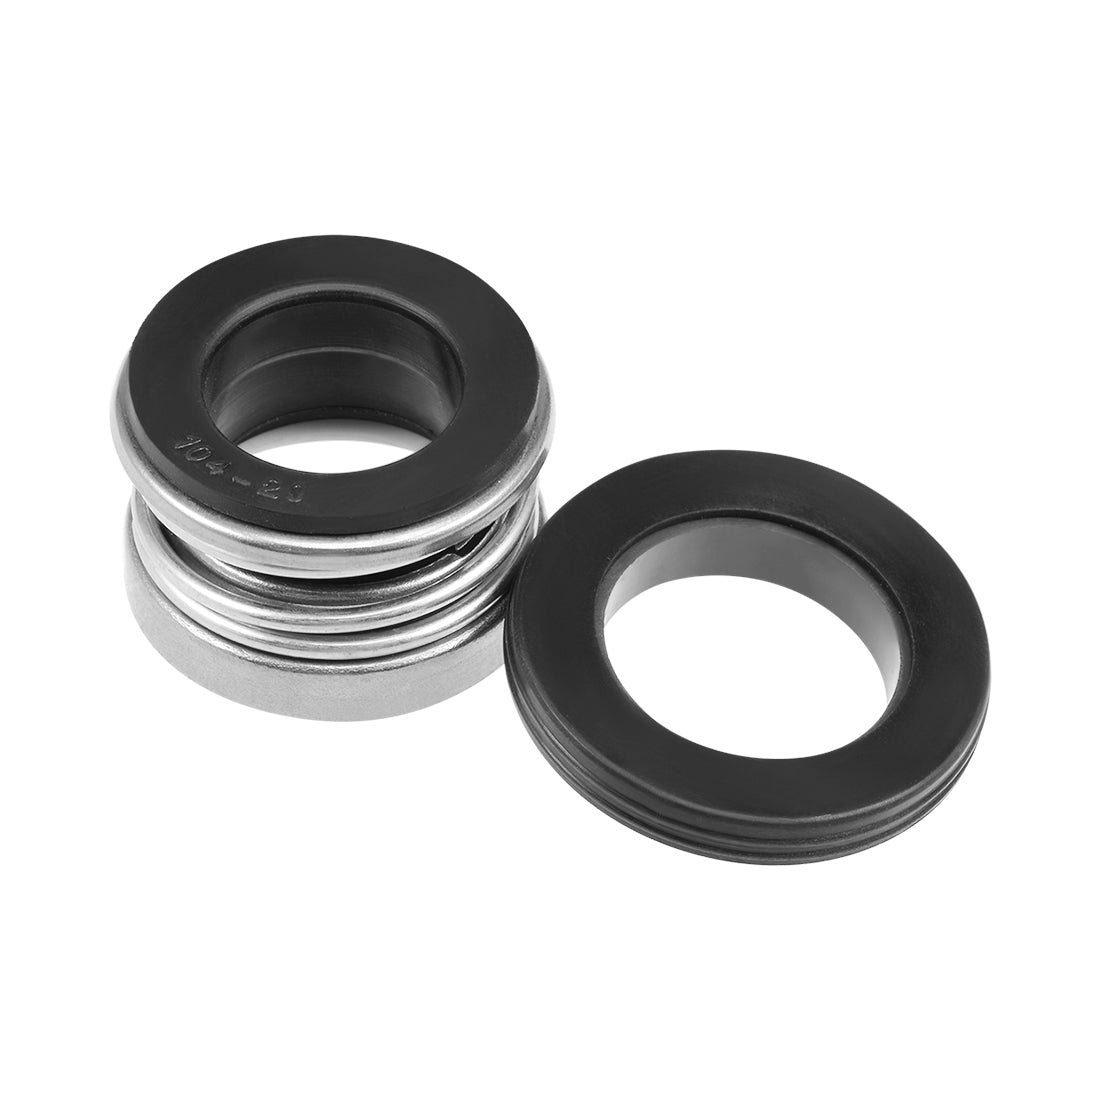 uxcell Uxcell Mechanical Shaft Seal Replacement for Pool Spa Pump 104-20 1Pcs